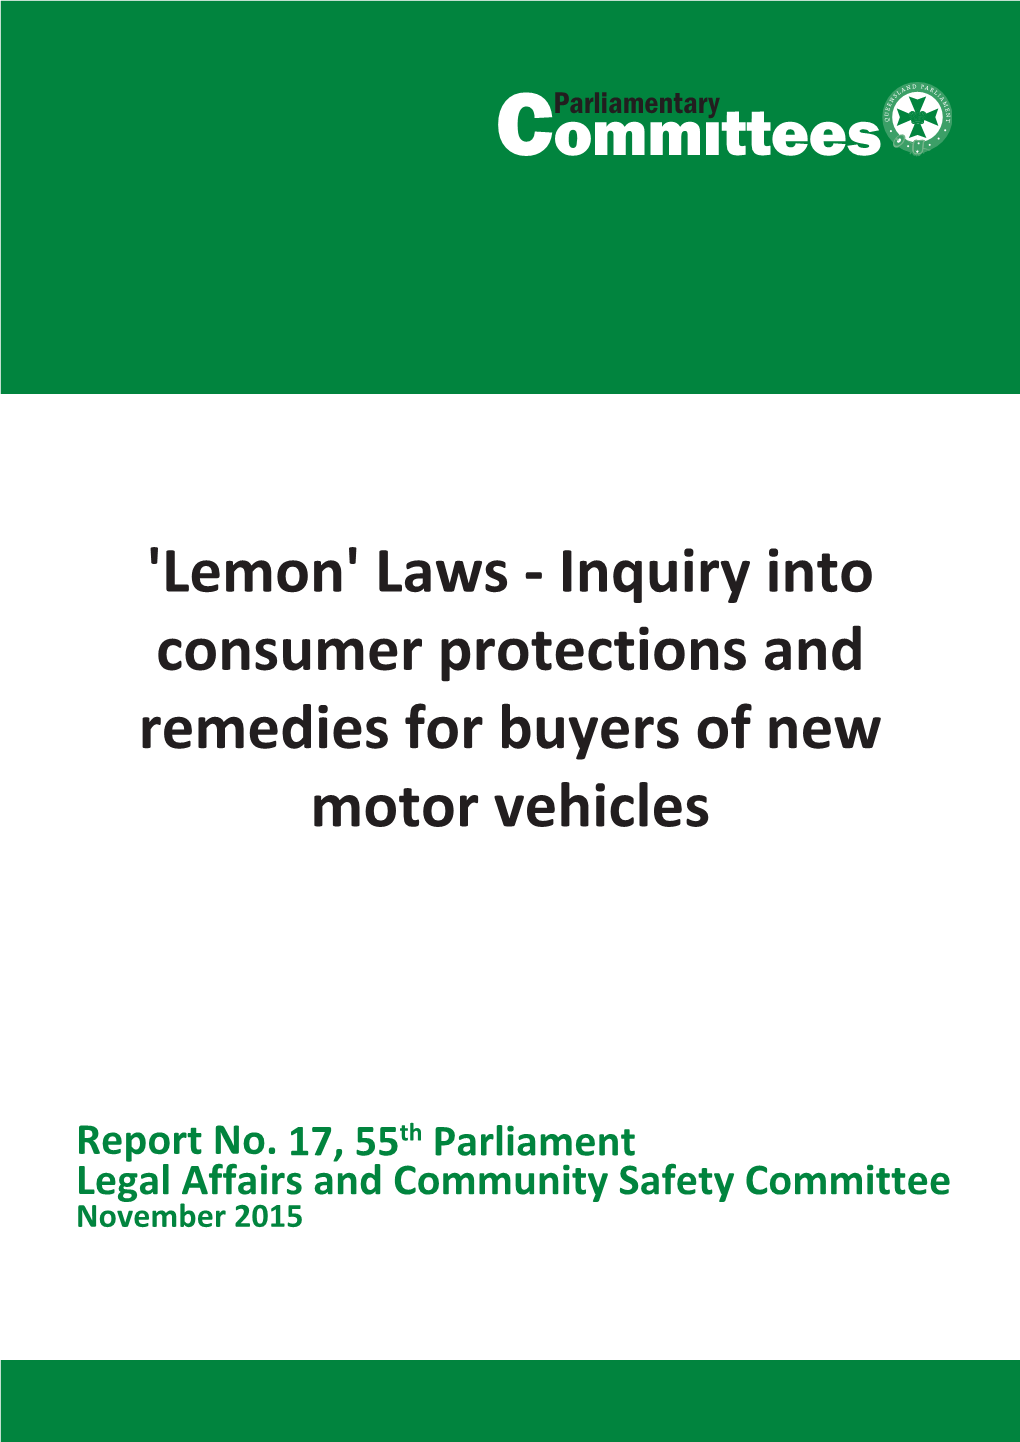 'Lemon' Laws - Inquiry Into Consumer Protections and Remedies for Buyers of New Motor Vehicles